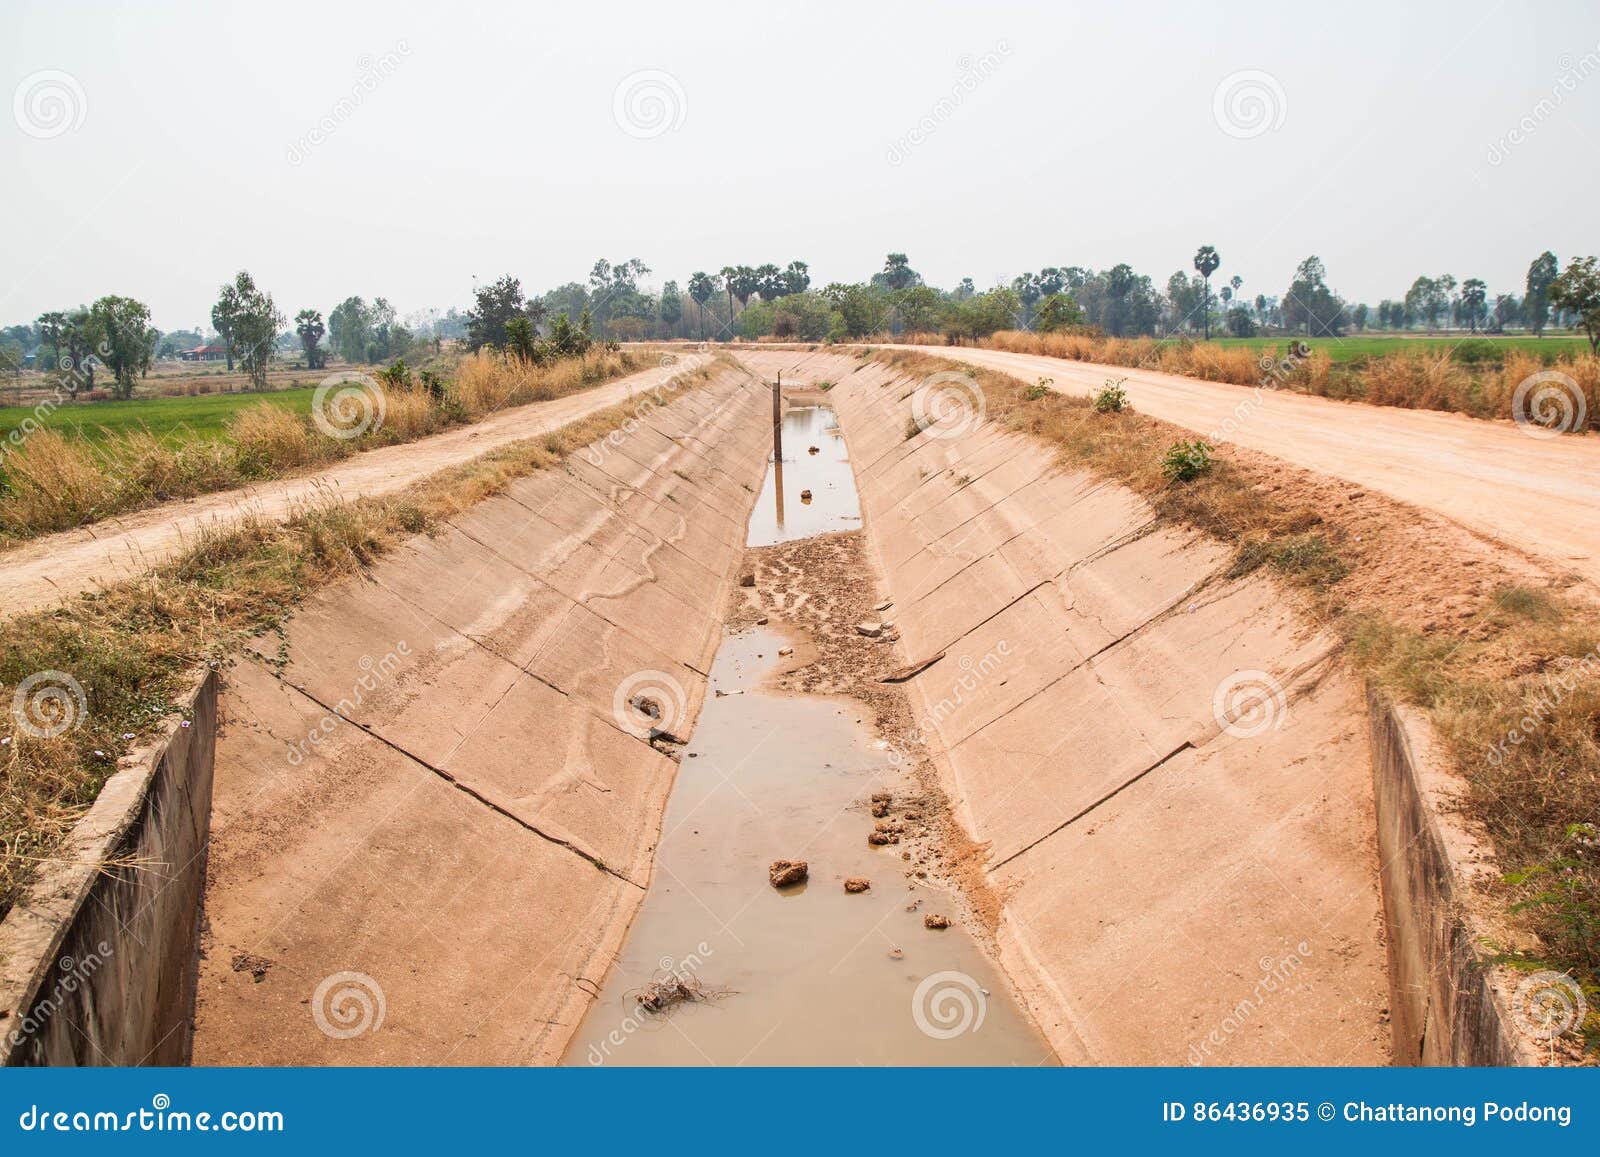 water diversion canal